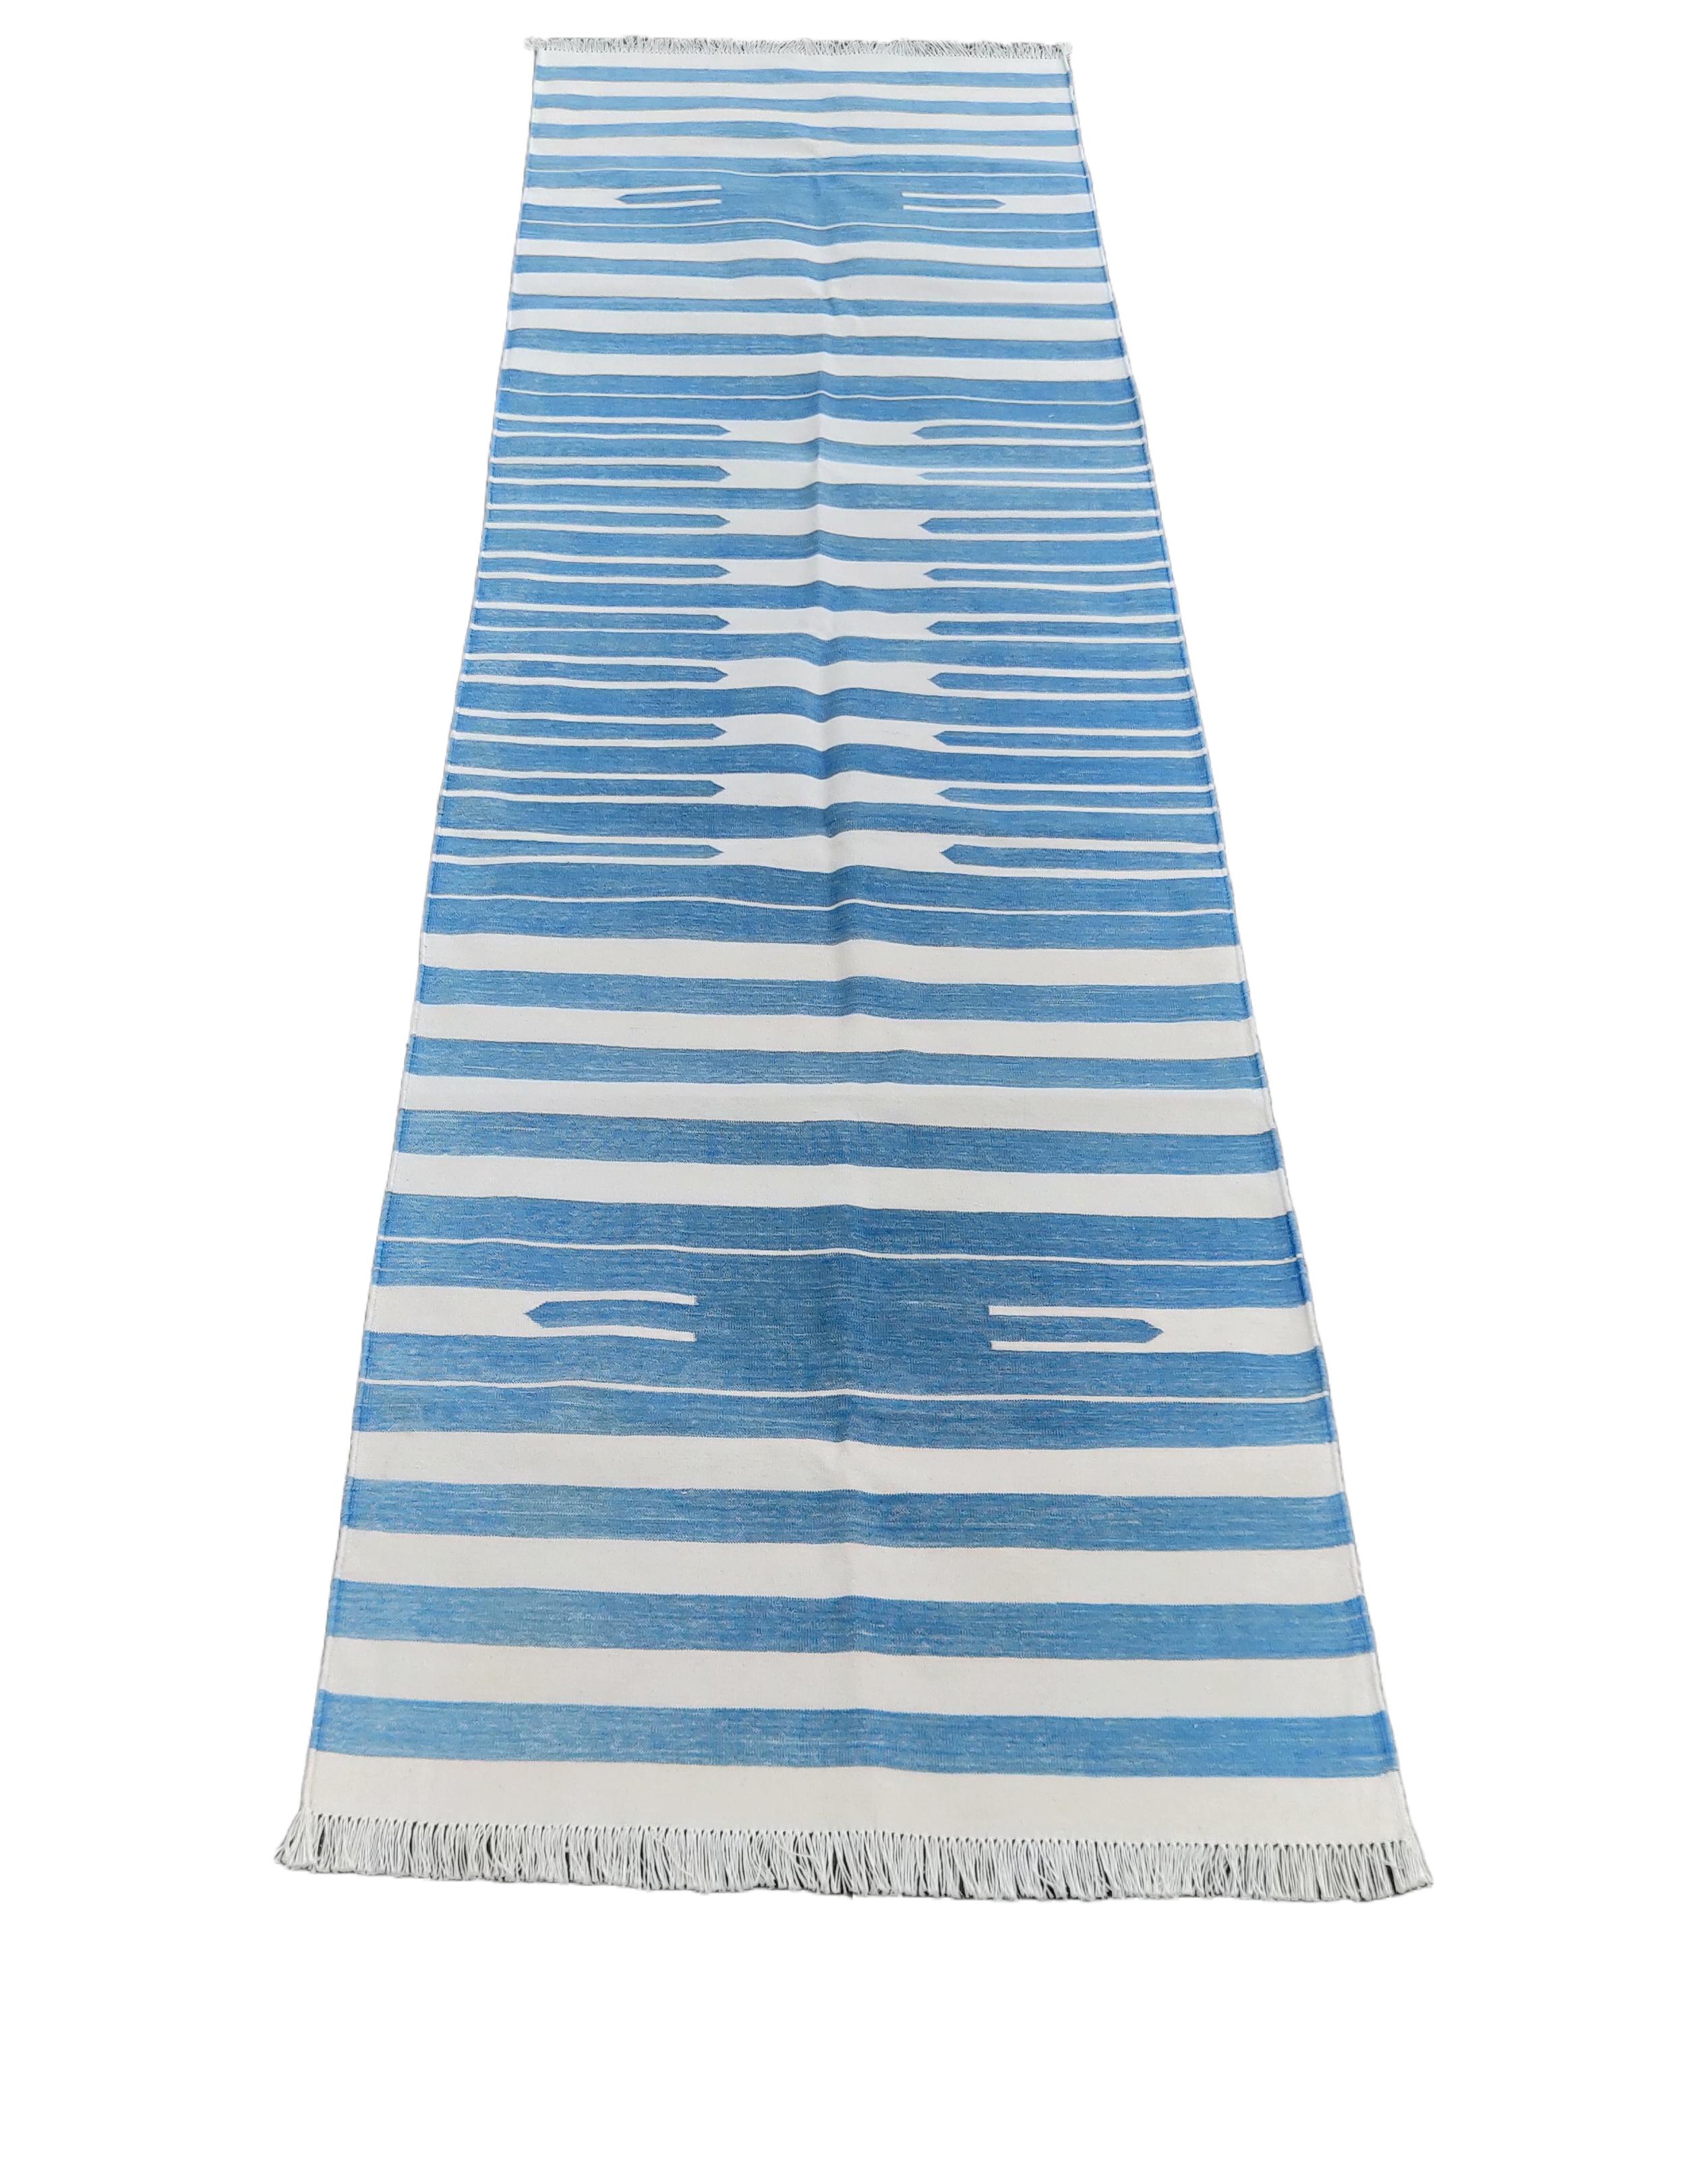 Mid-Century Modern Handmade Cotton Area Flat Weave Runner, 3x12 Blue And White Striped Dhurrie Rug For Sale